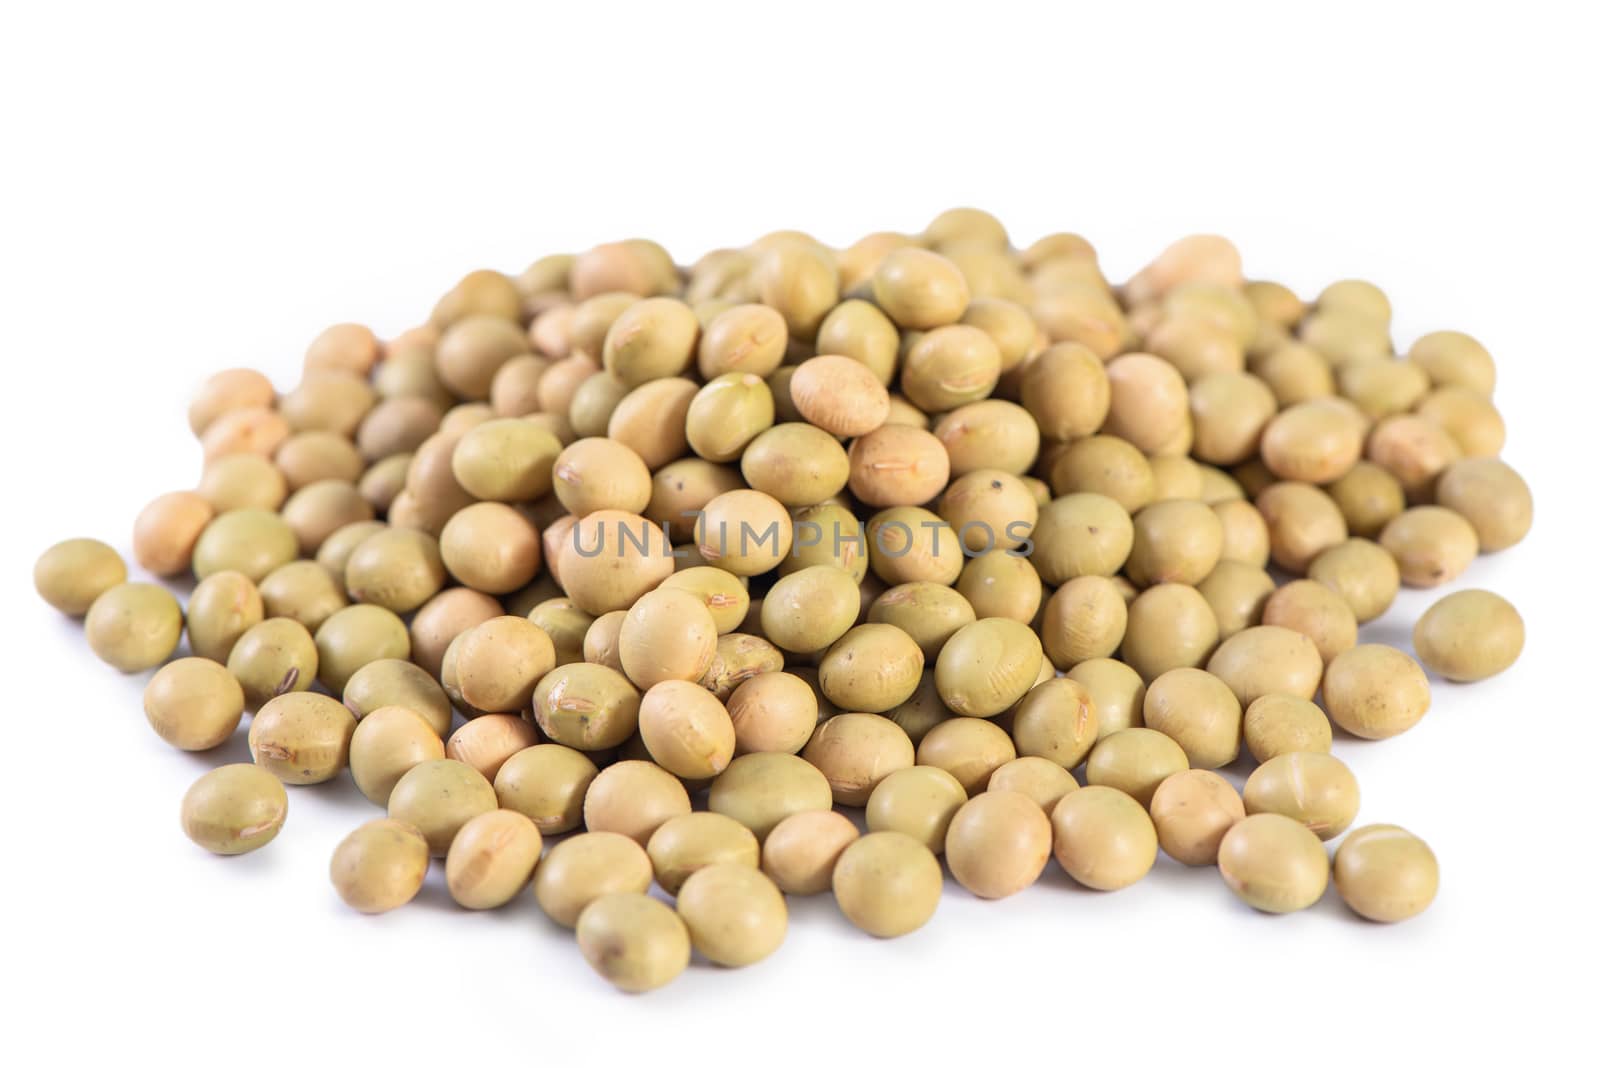 Yellow-green Taiwanese organic non-GMO soybeans, soy beans in a container isolated on white backgorund, close up, clipping path.